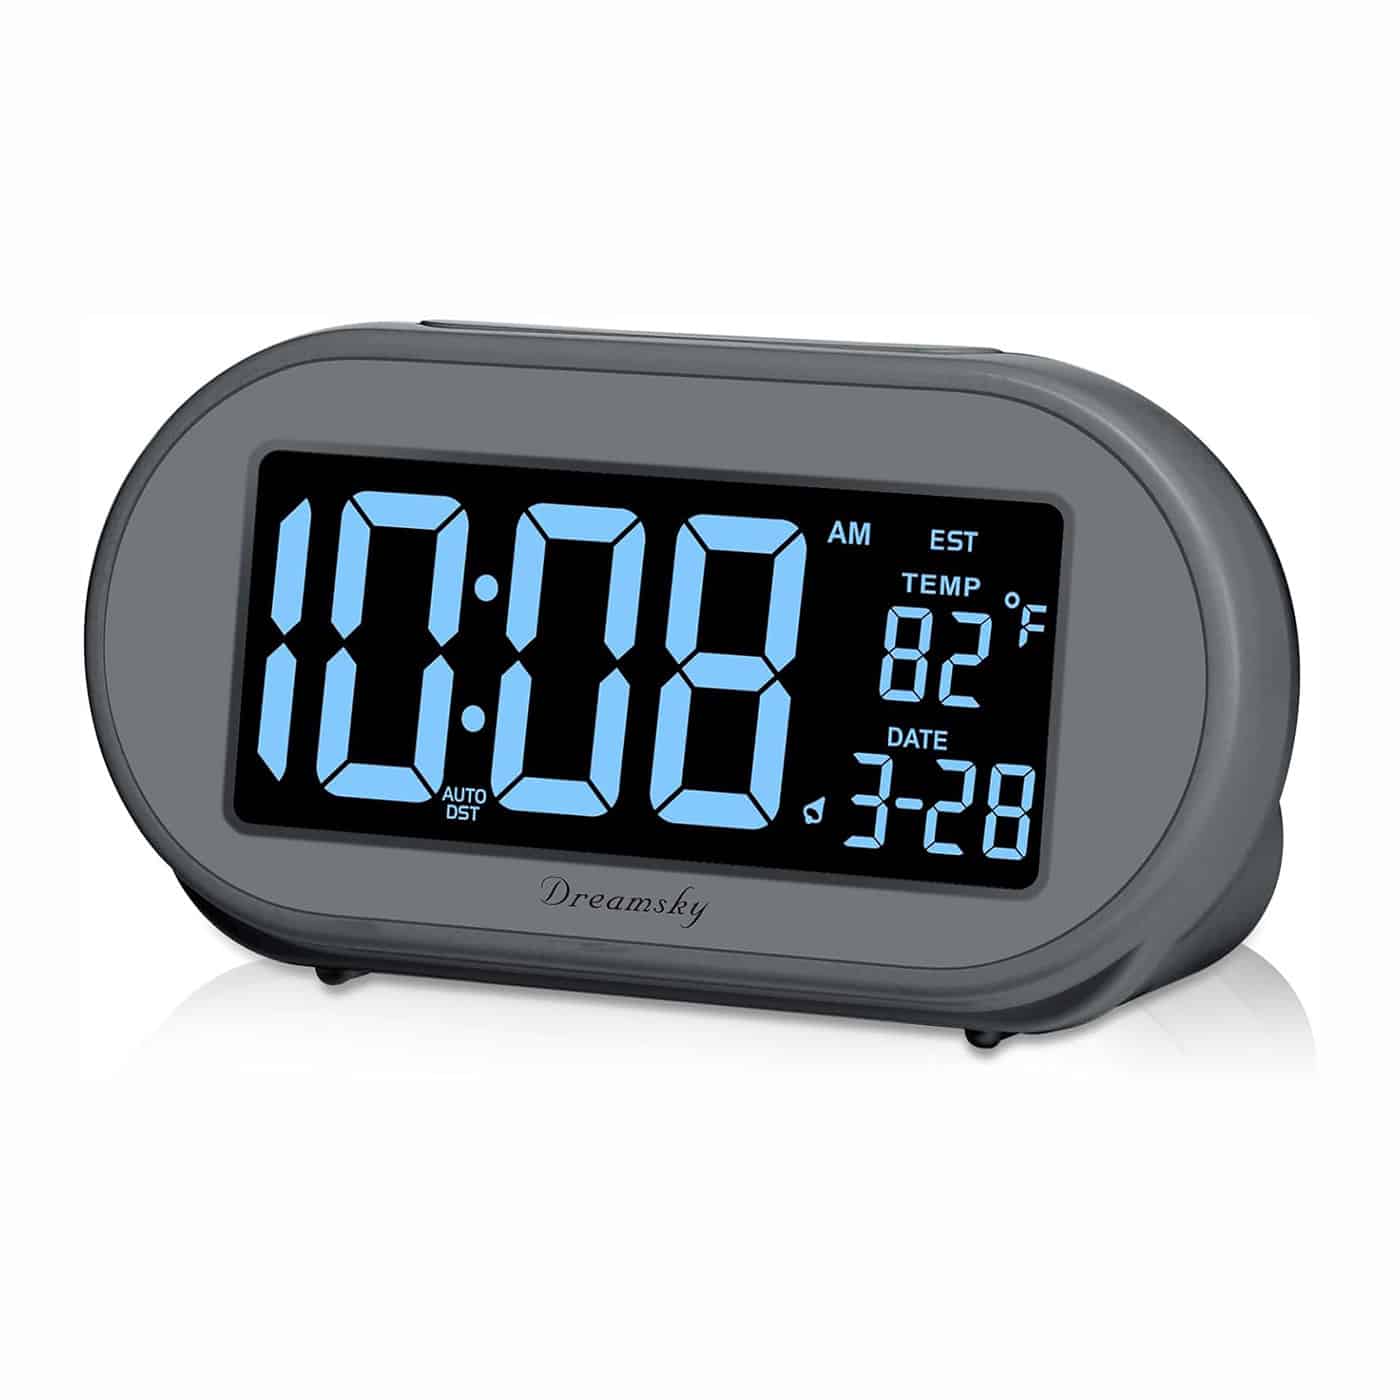 Ascending Soft Beep Alarm Clock with Dimmable Brightness